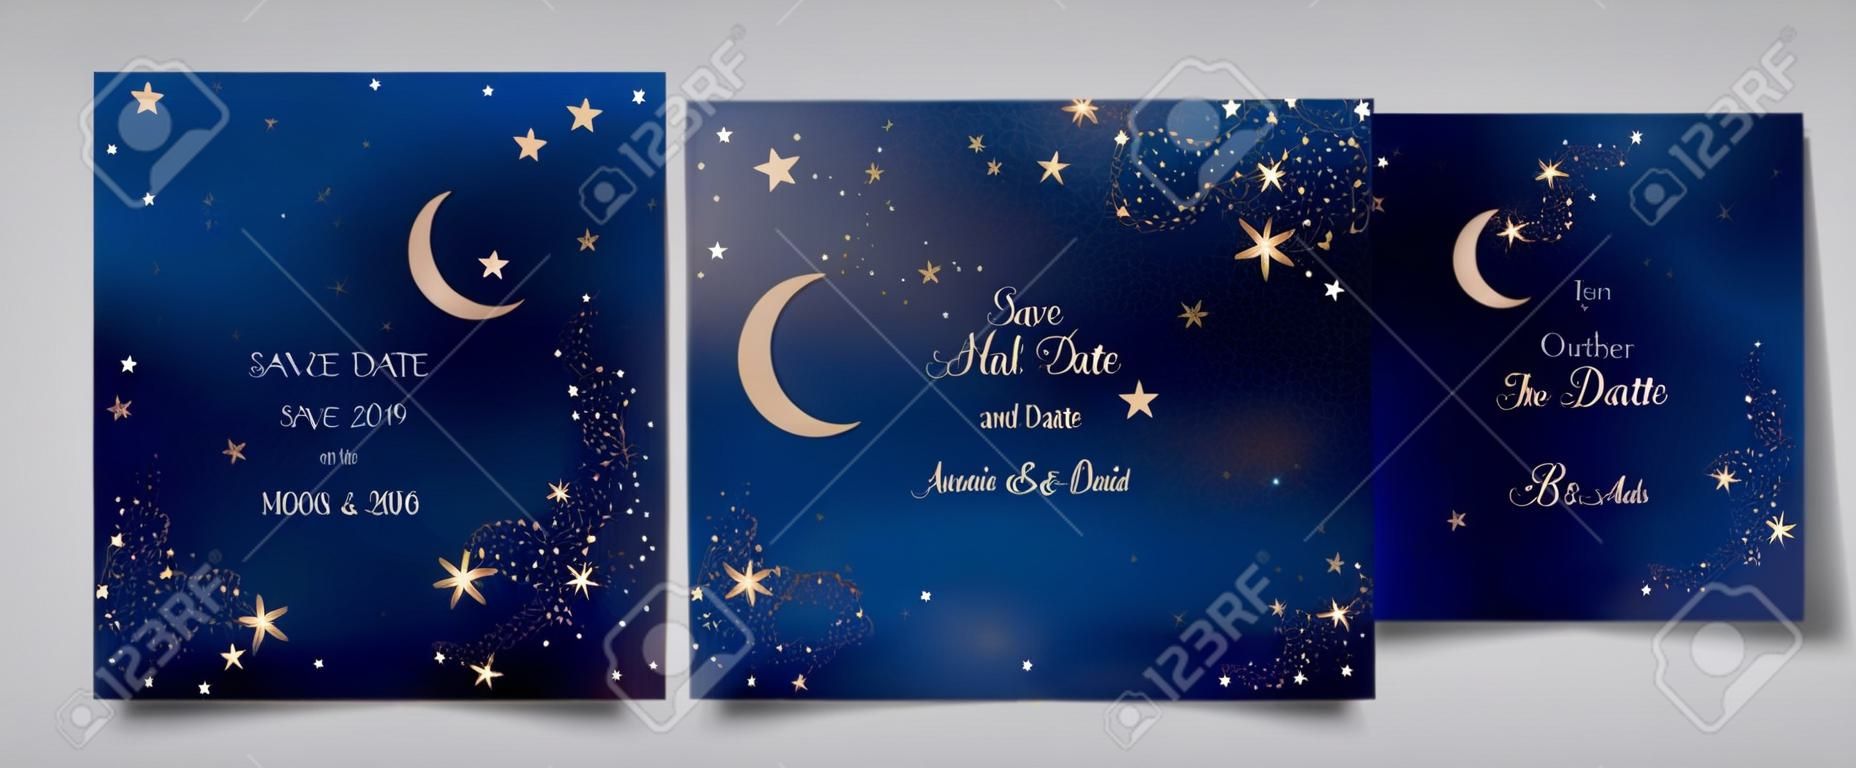 Mystical Night sky background with half moon and stars. Wedding moonlight night Invitation and Save the Date Card in vector